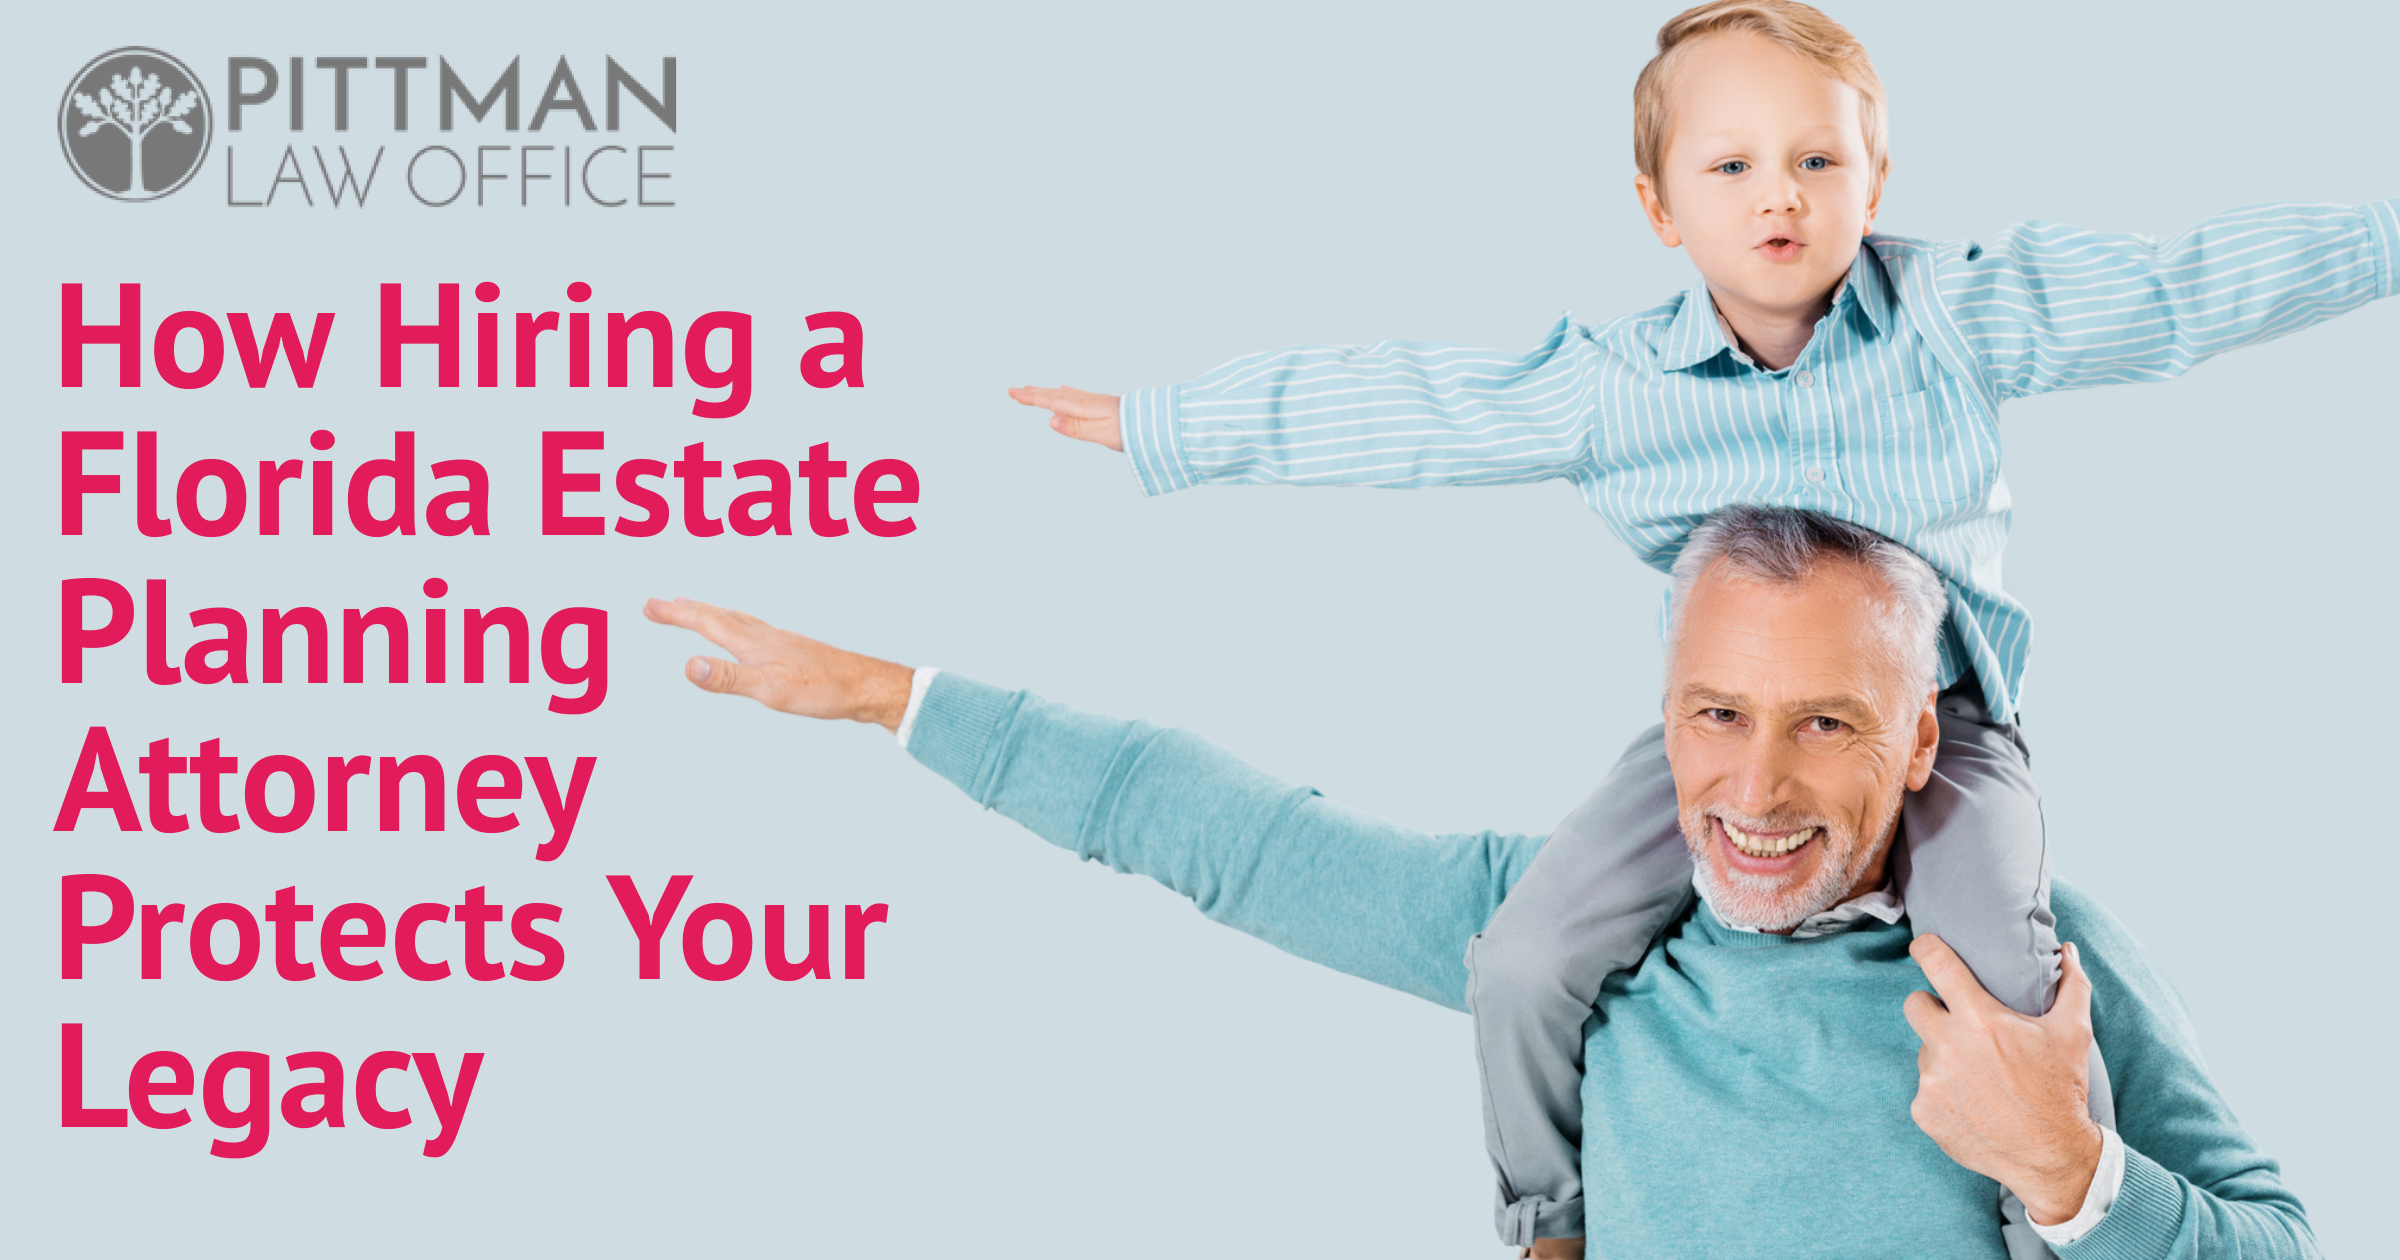 How Hiring a Florida Estate Planning Attorney Protects Your Legacy